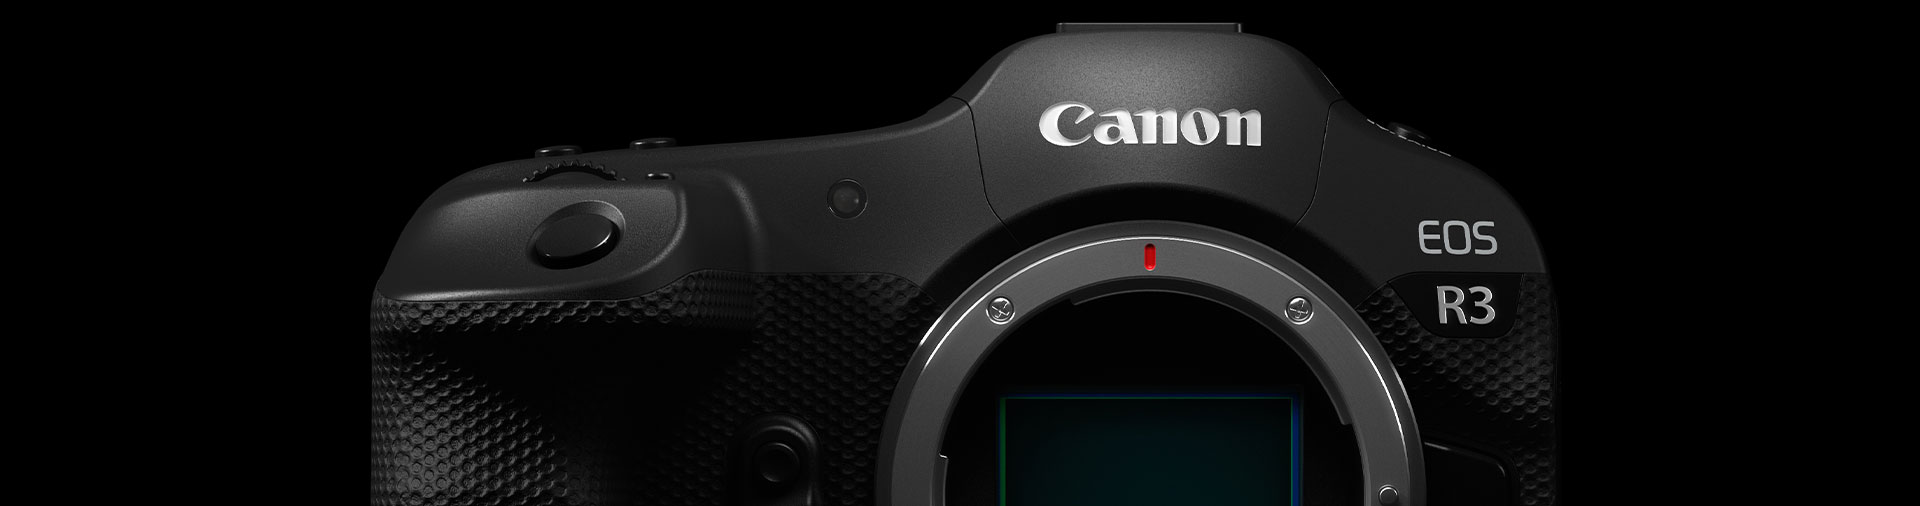 canons-new-mirrorless-eos-r3-camera-body-against-black-background